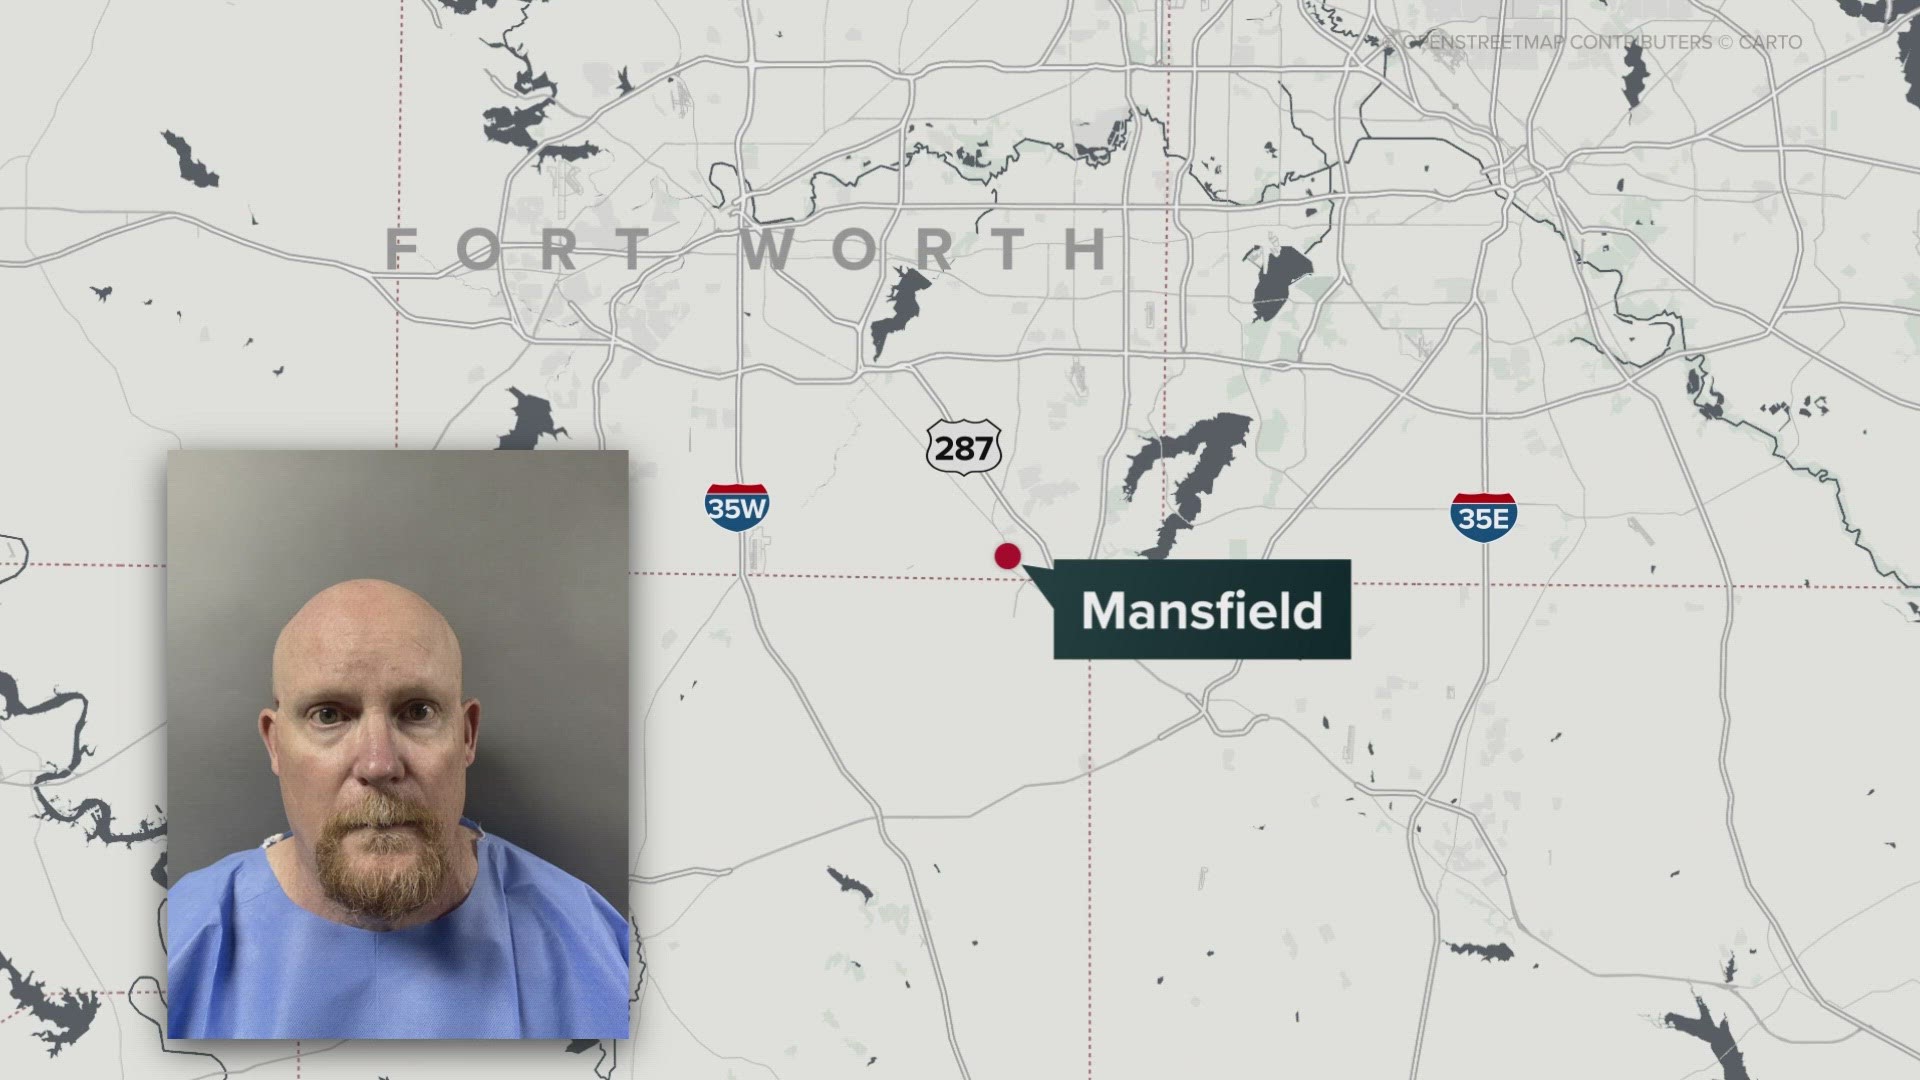 Mansfield Isd Teacher Accused Of Shooting Son Stepdaughter After Assaulting Wife 2710